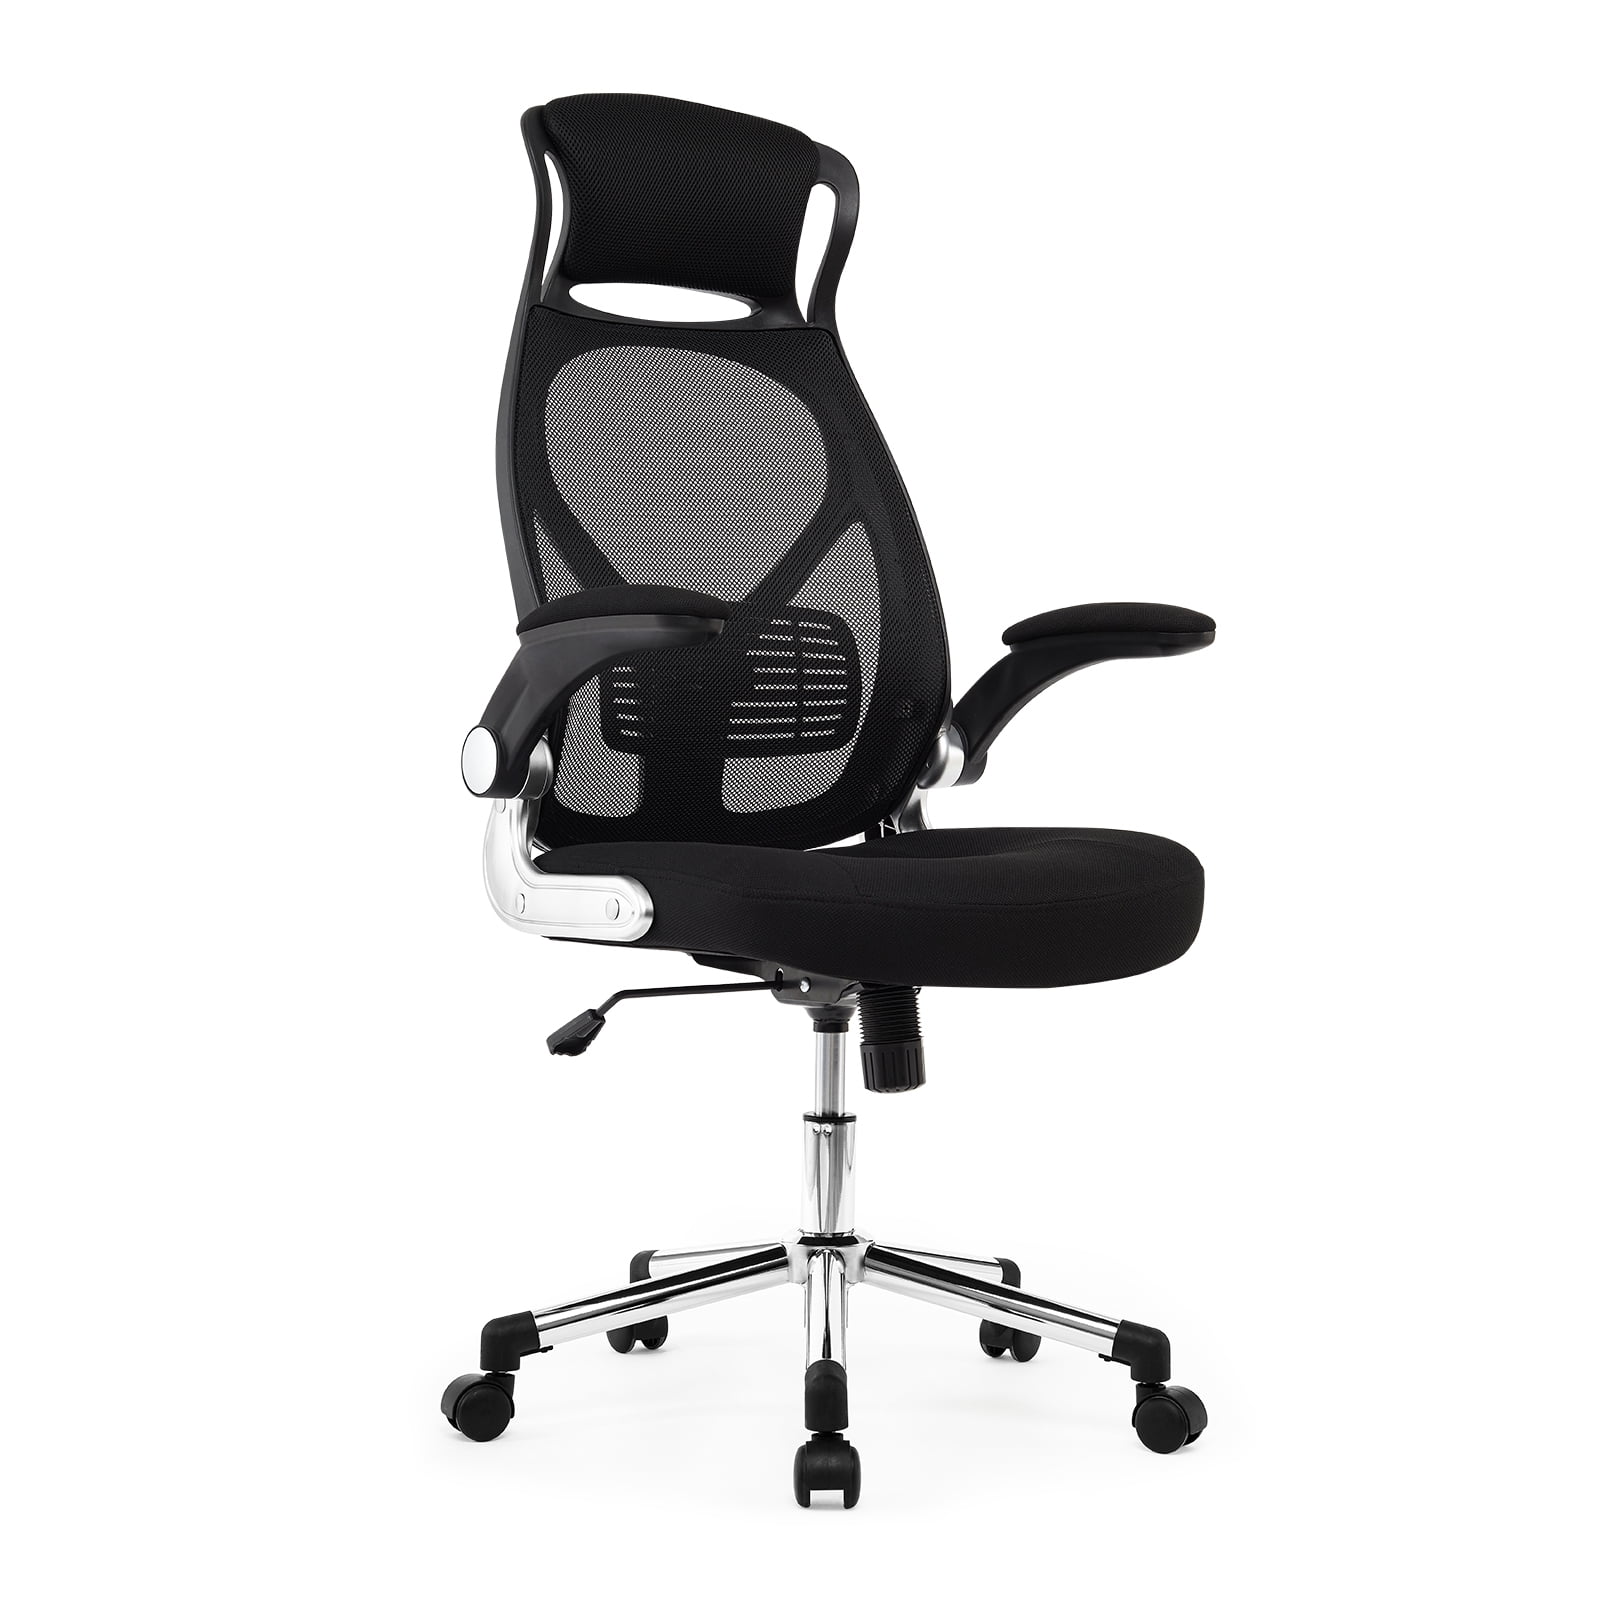 Racing Sport PU Leather & Fabric Swivel Mesh Ergonomic Computer Desk Chair IWMH High-Back Office Chair with Head Support Height Adjustable Back height 73 cm/ 28.7 inch Black 